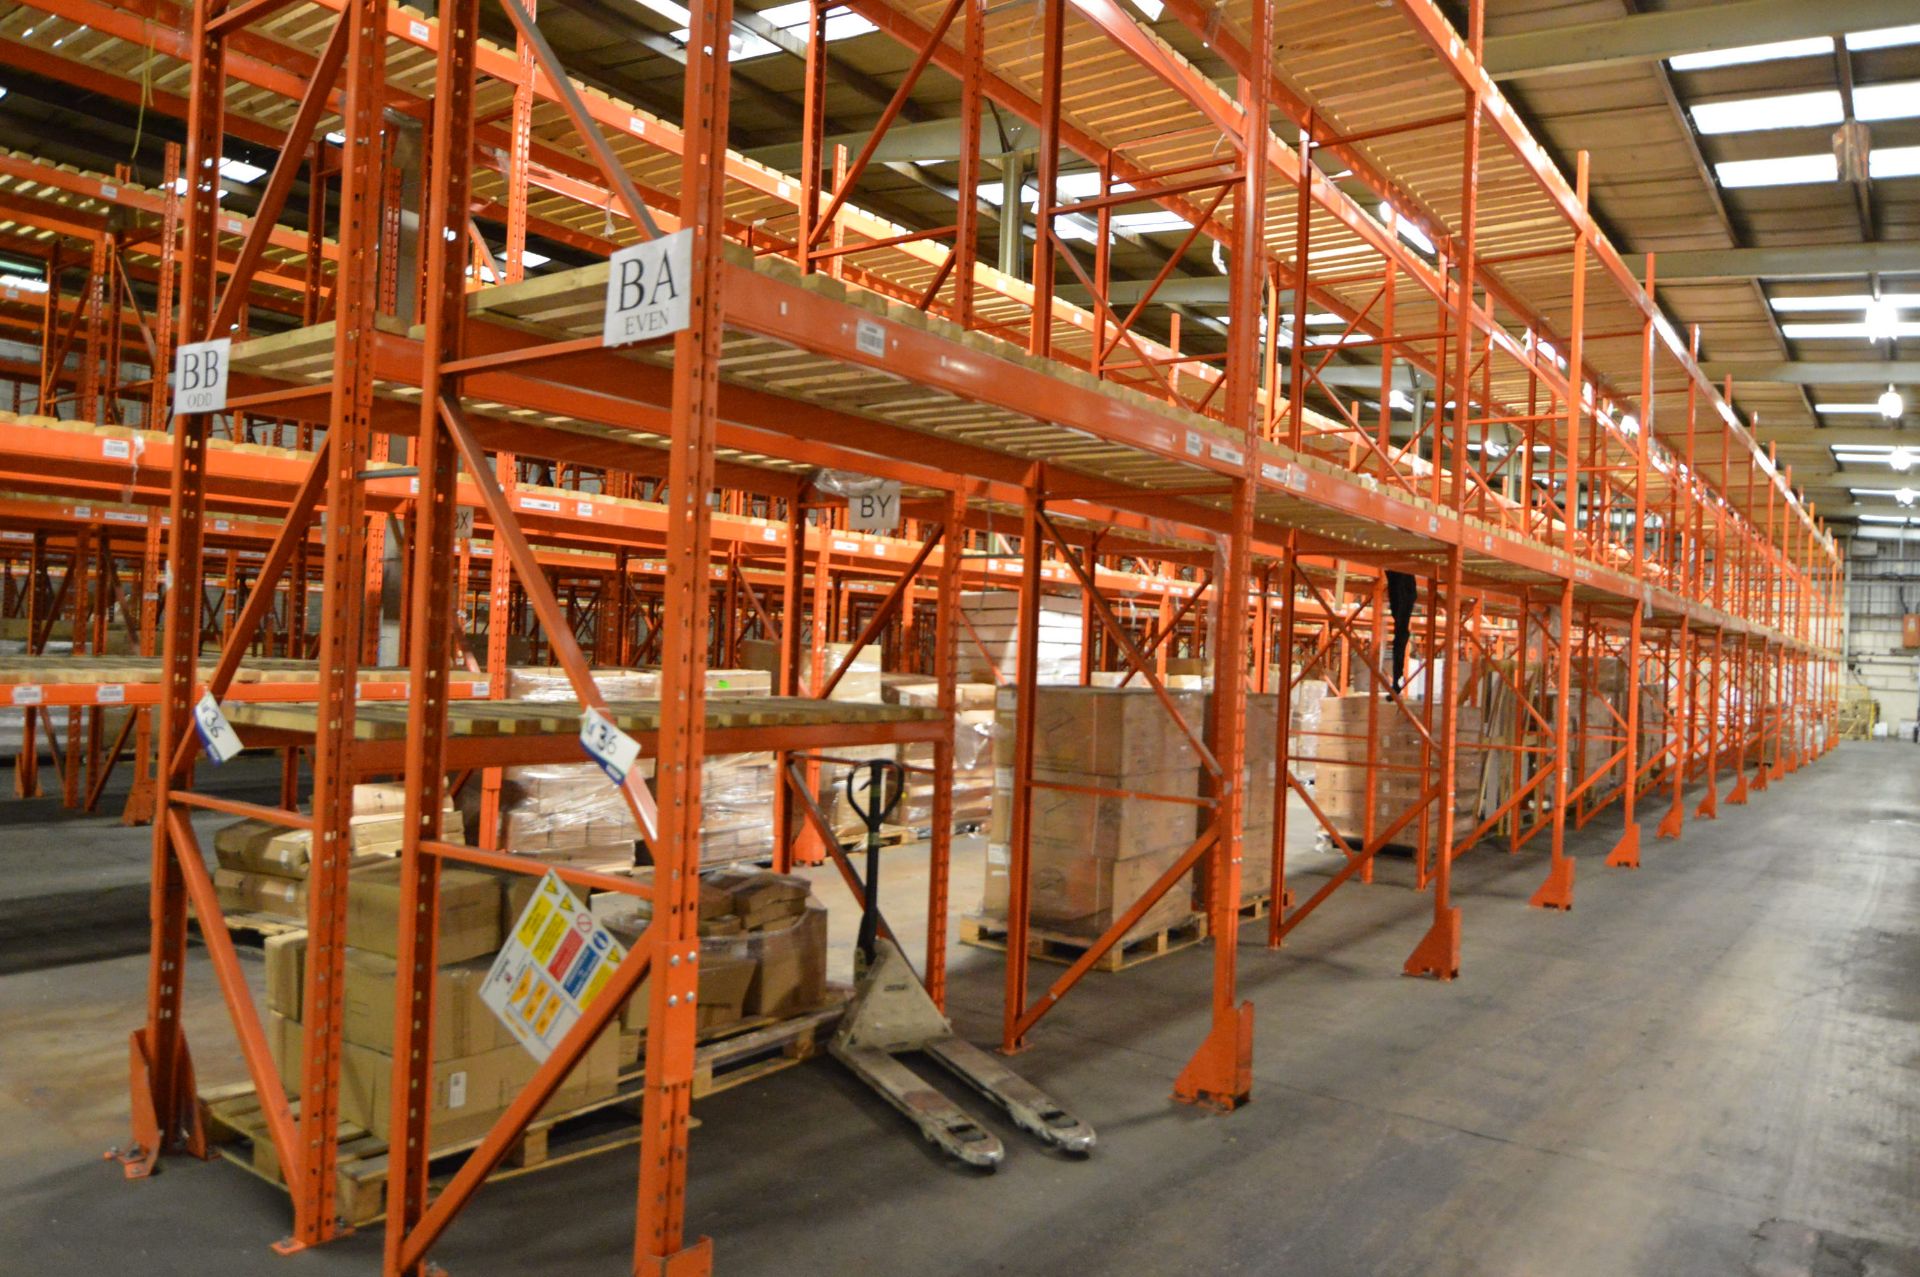 Redirack SD 2.50 DOUBLE SIDED 30 BAY MAINLY TWO TIER PALLET RACK, each run approx. 41m x 1m x 5.4m - Image 3 of 4